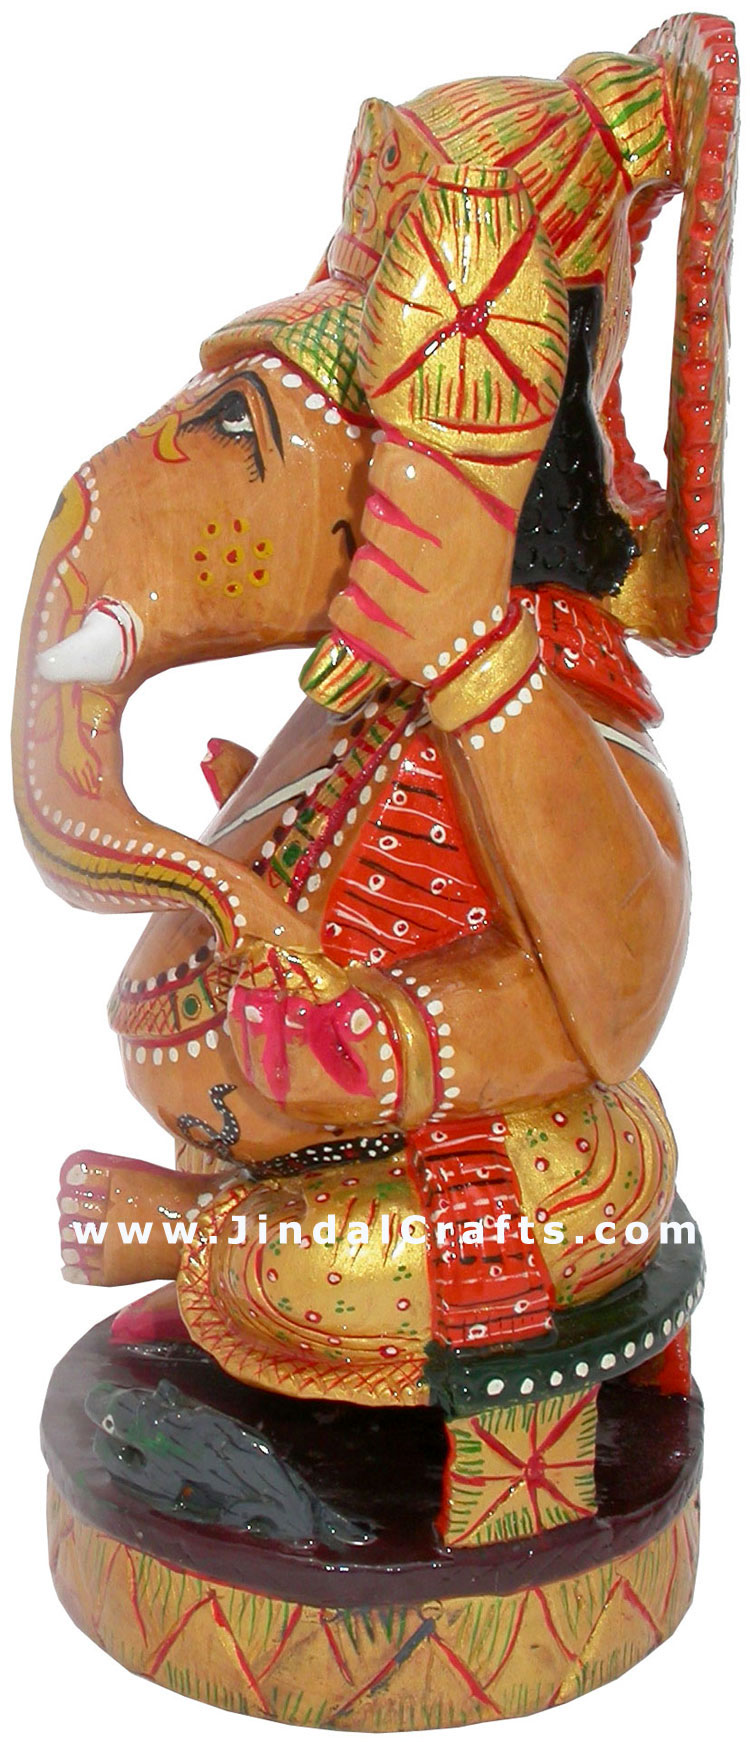 Hand Crafted Hand Painted Lord Ganesha Wooden Statue Indian God Idol Art Figure